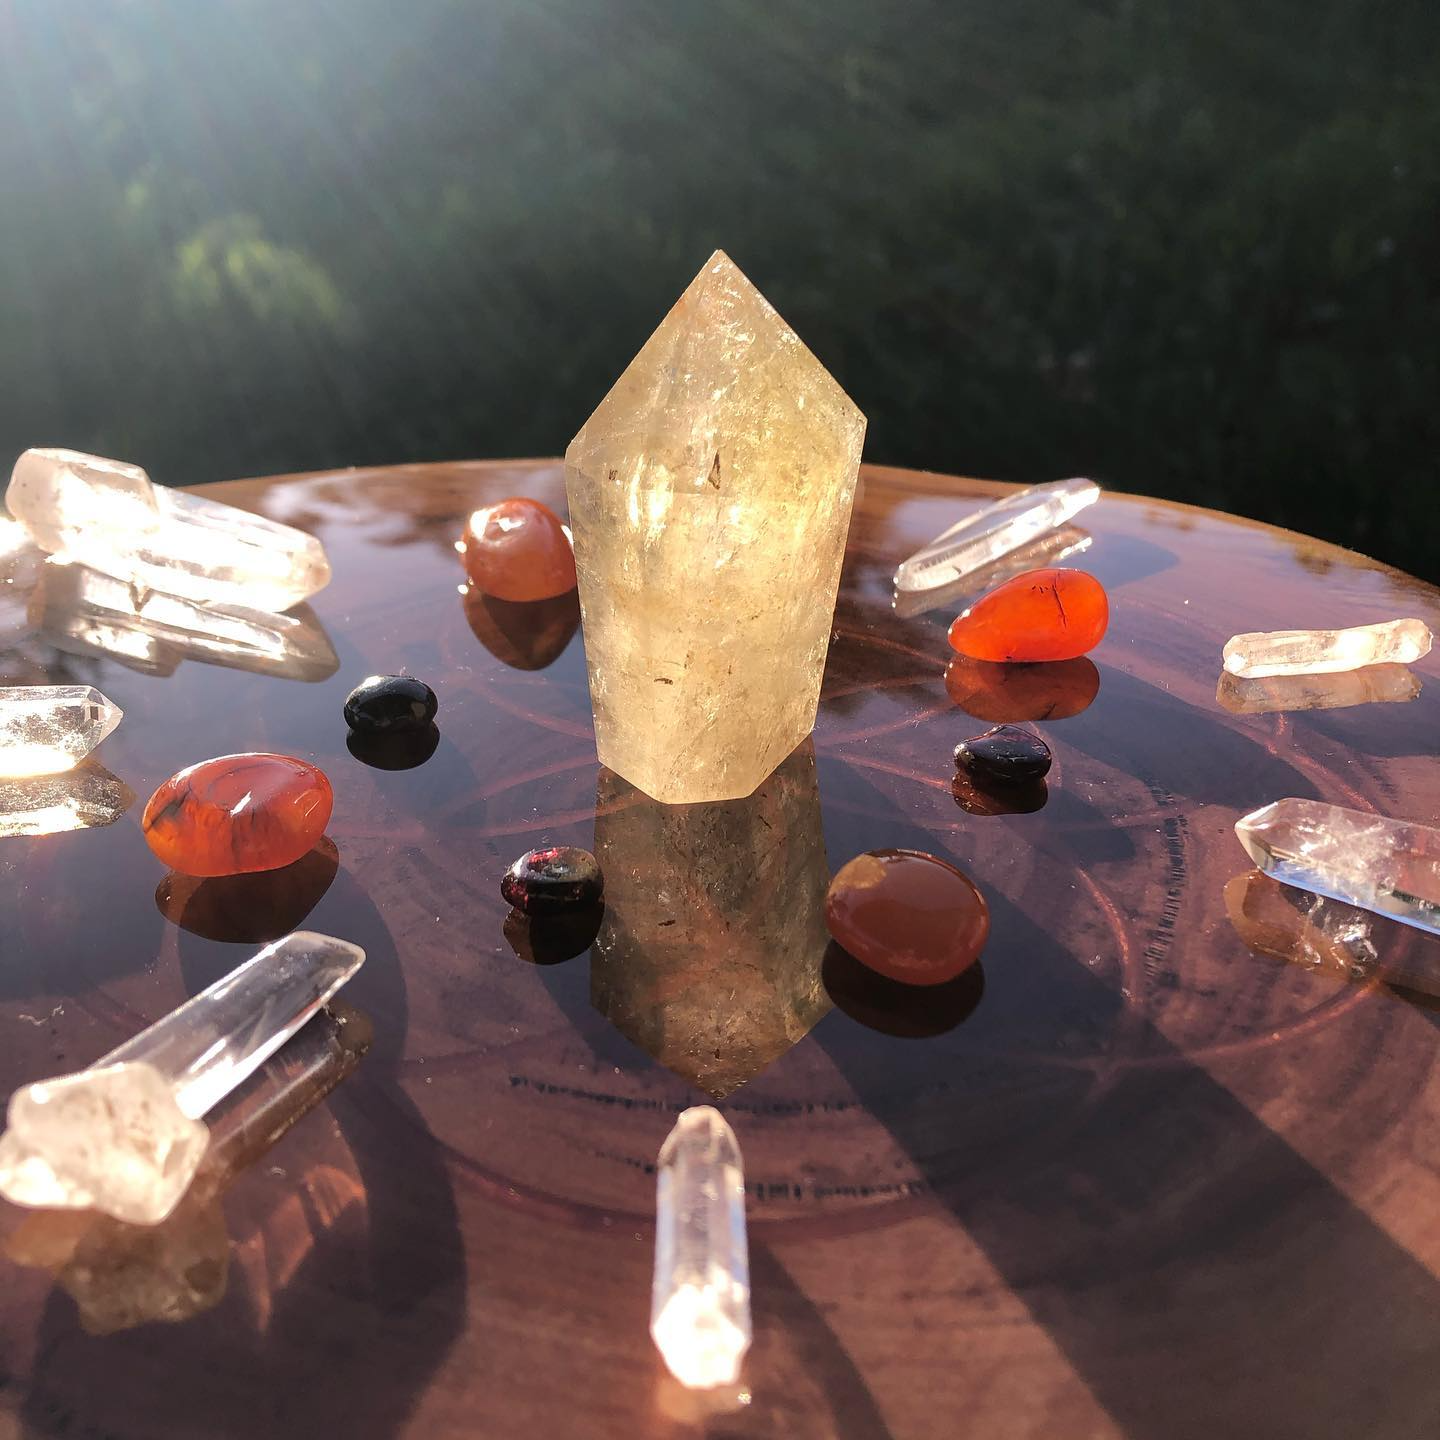 A crystal sitting on top of a table surrounded by other crystals